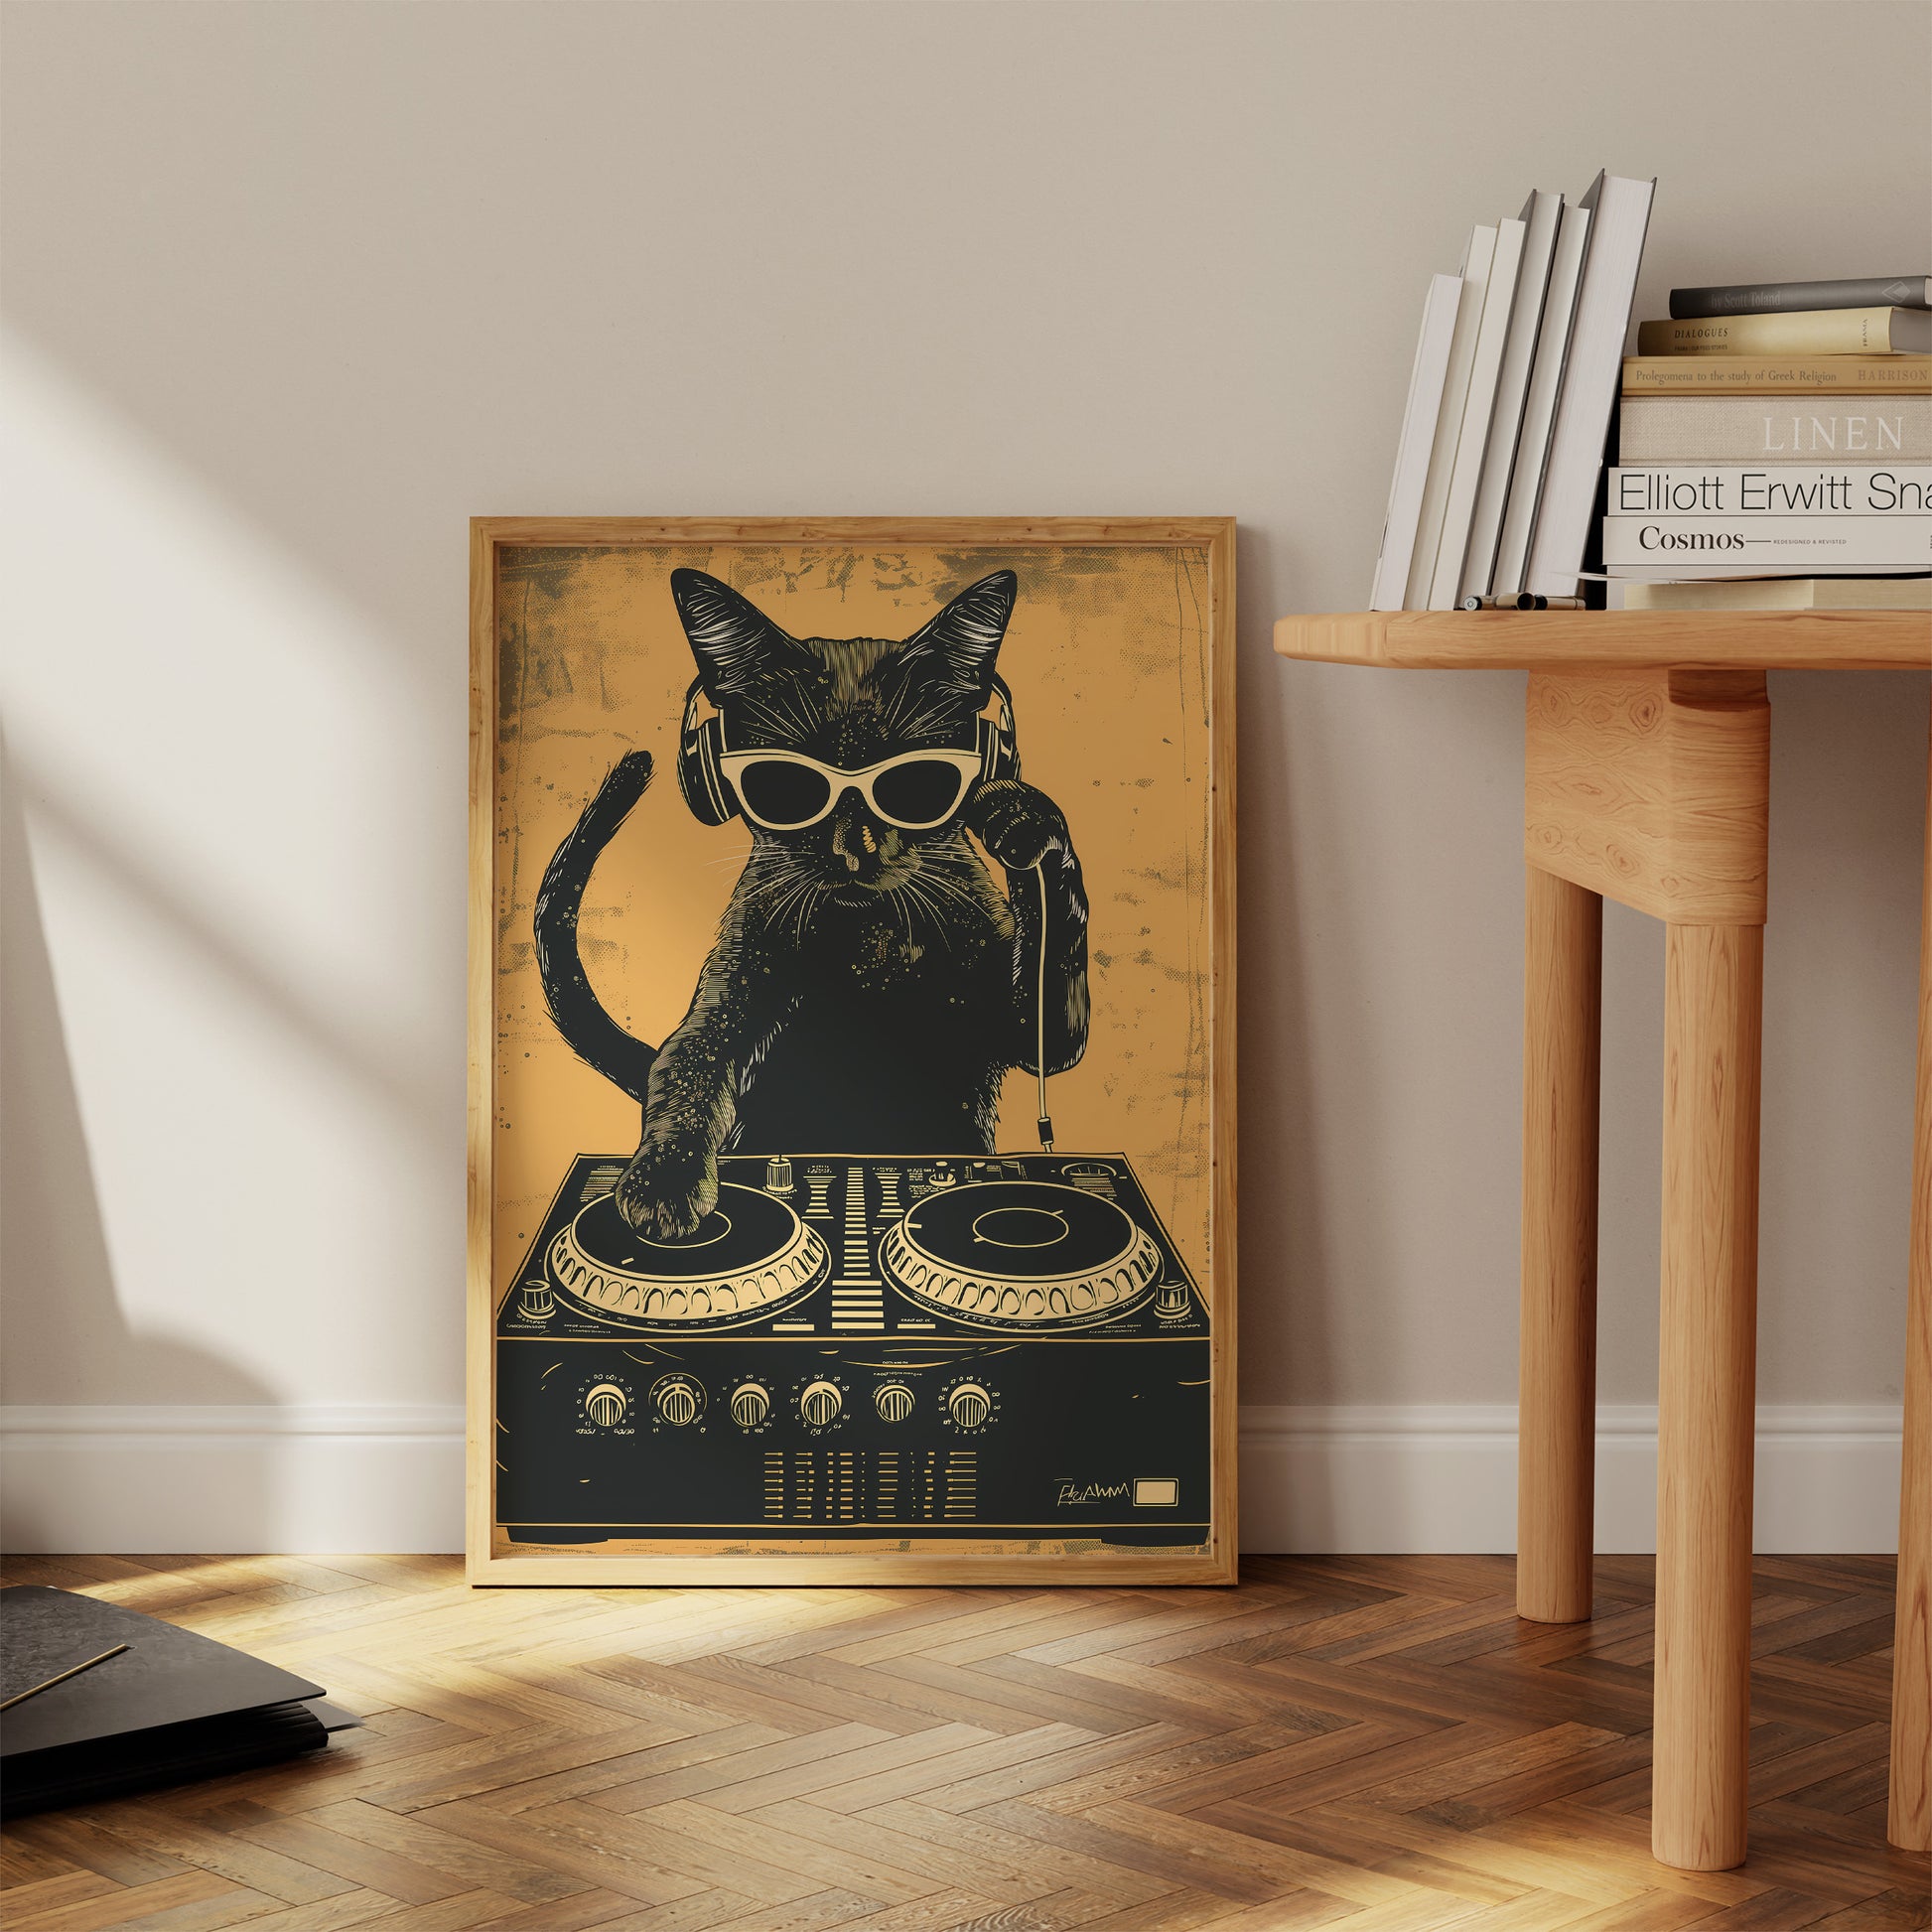 A poster of a cat with sunglasses DJing on a turntable, in a room with sunlight.